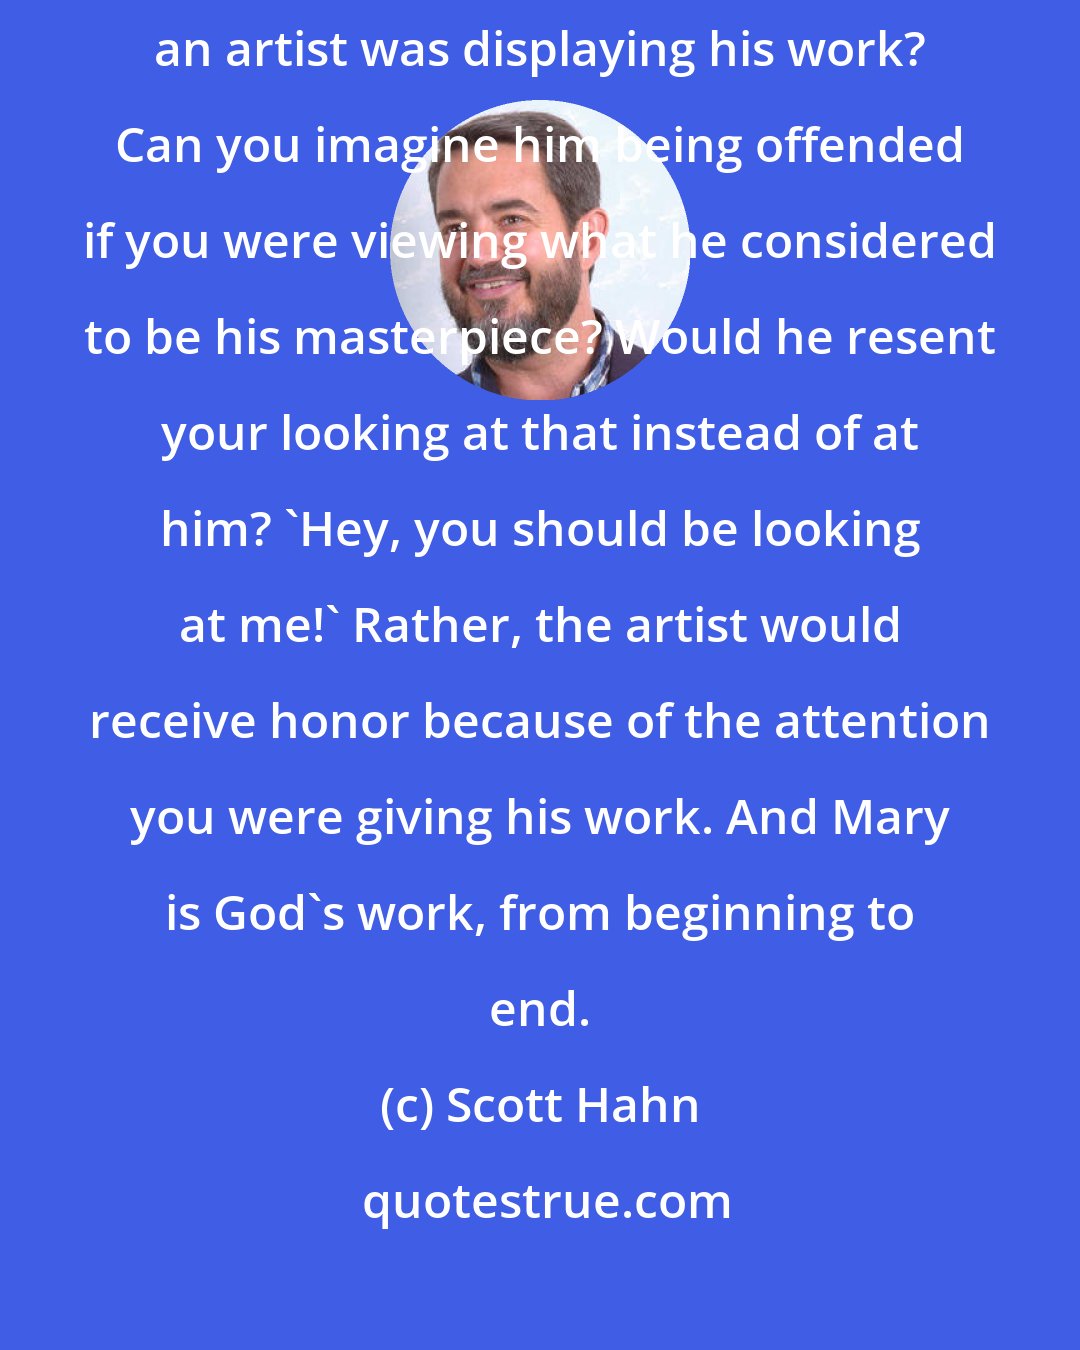 Scott Hahn: Mary is God's masterpiece. Have you ever walked into a museum where an artist was displaying his work? Can you imagine him being offended if you were viewing what he considered to be his masterpiece? Would he resent your looking at that instead of at him? 'Hey, you should be looking at me!' Rather, the artist would receive honor because of the attention you were giving his work. And Mary is God's work, from beginning to end.